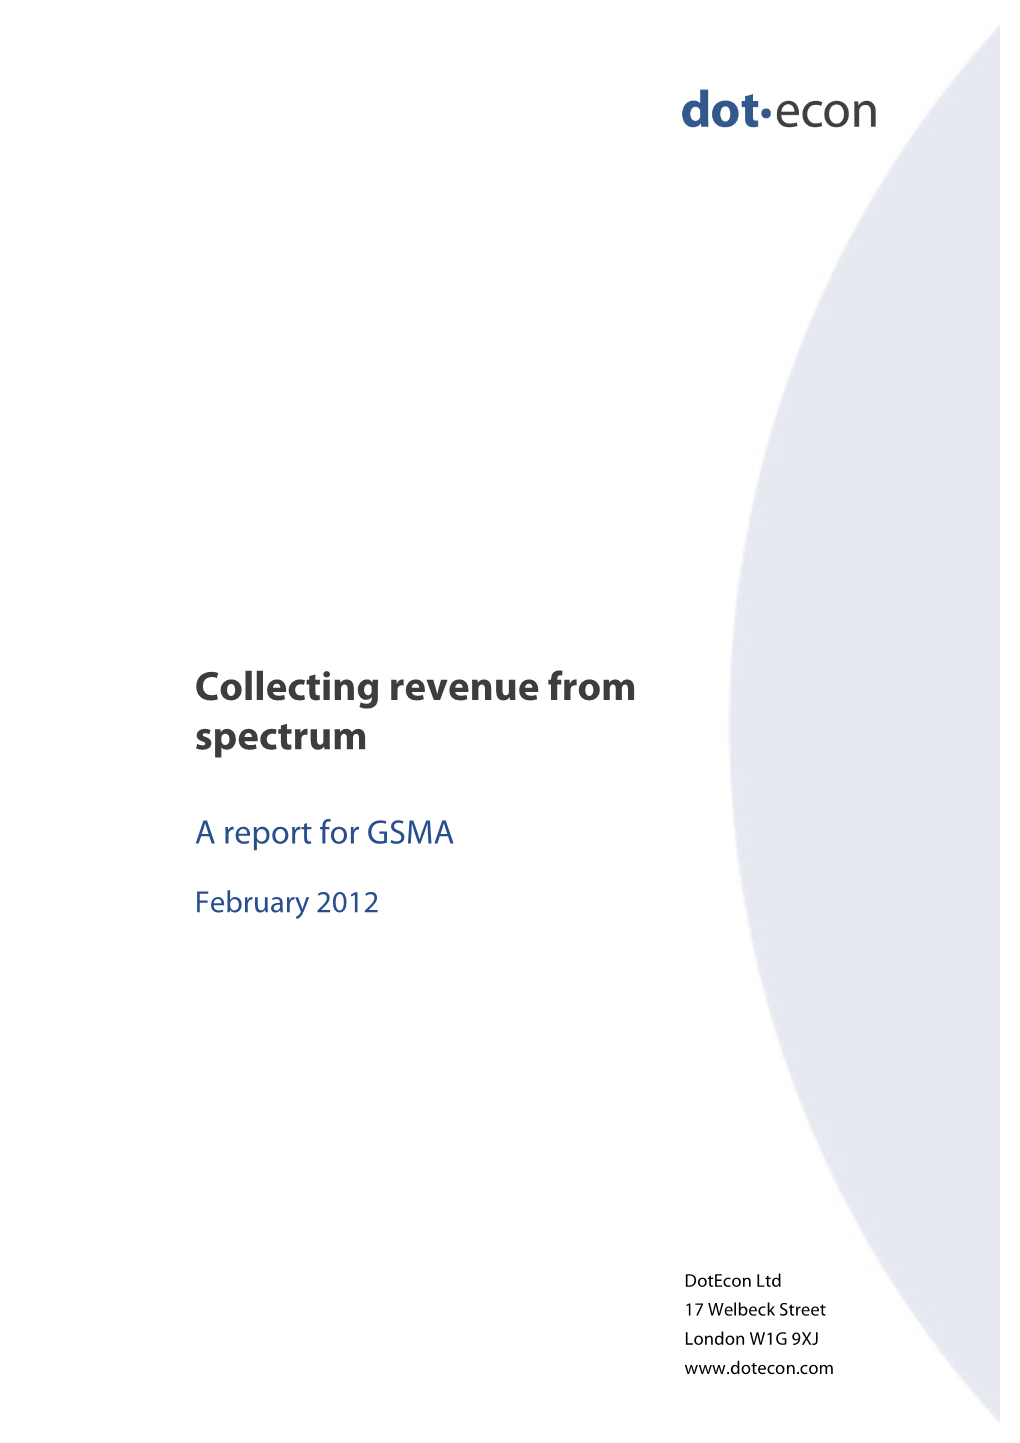 Report for GSMA on Collecting Revenue from Spectrum Auctions